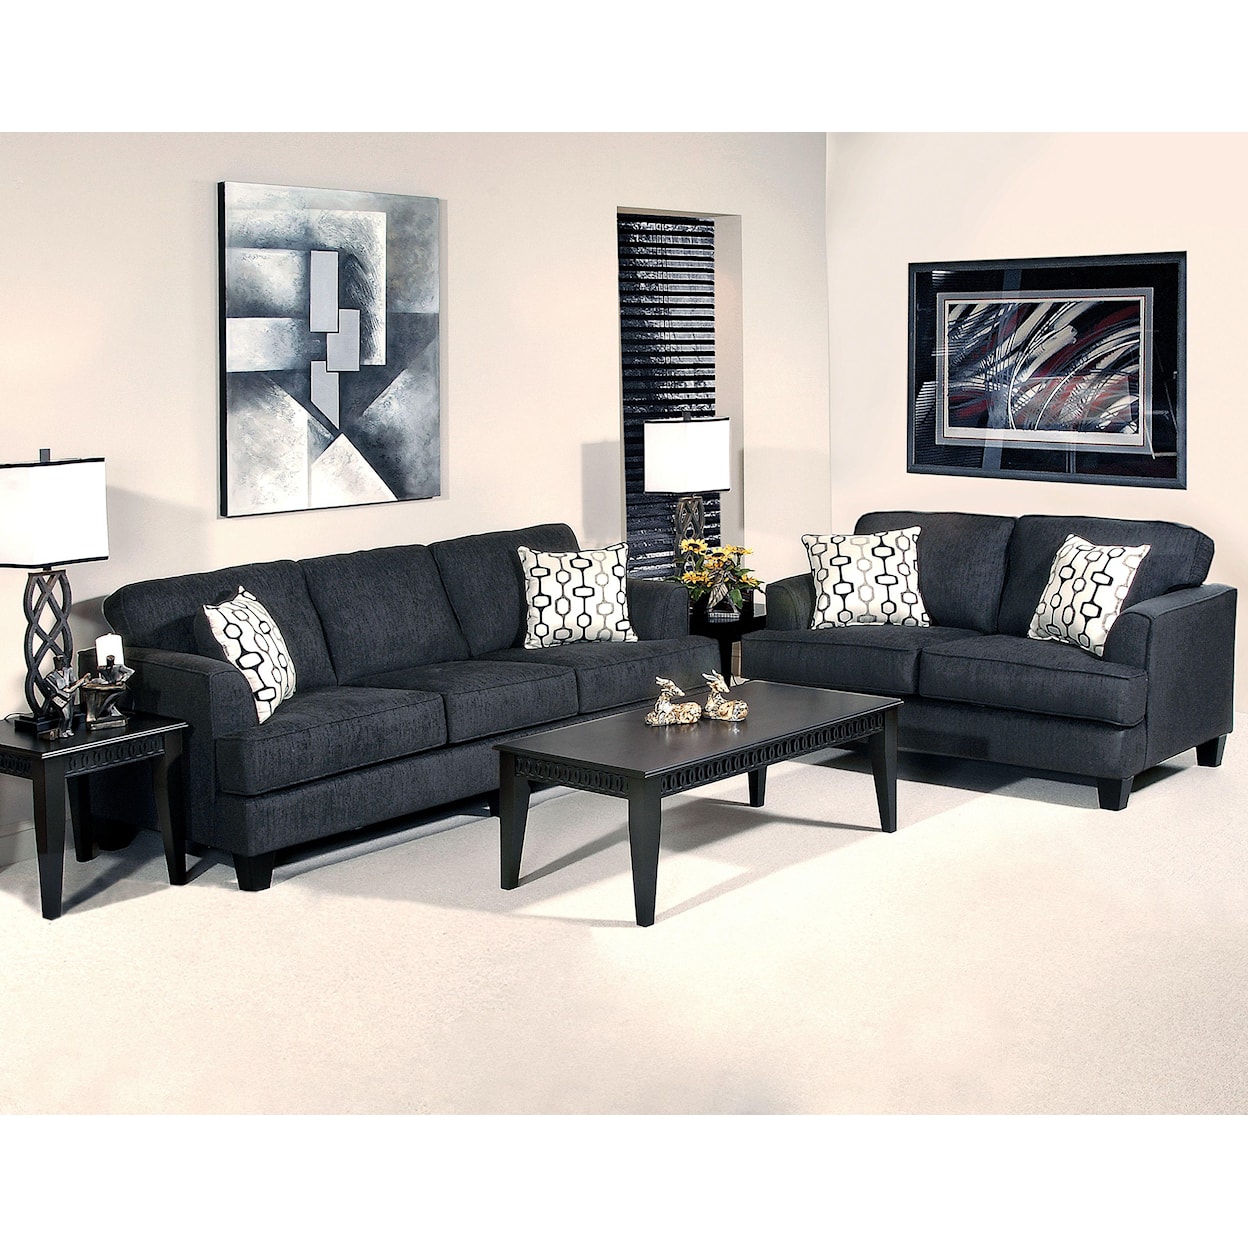 Serta Upholstery by Hughes Furniture 5600 Stationary Living Room Group